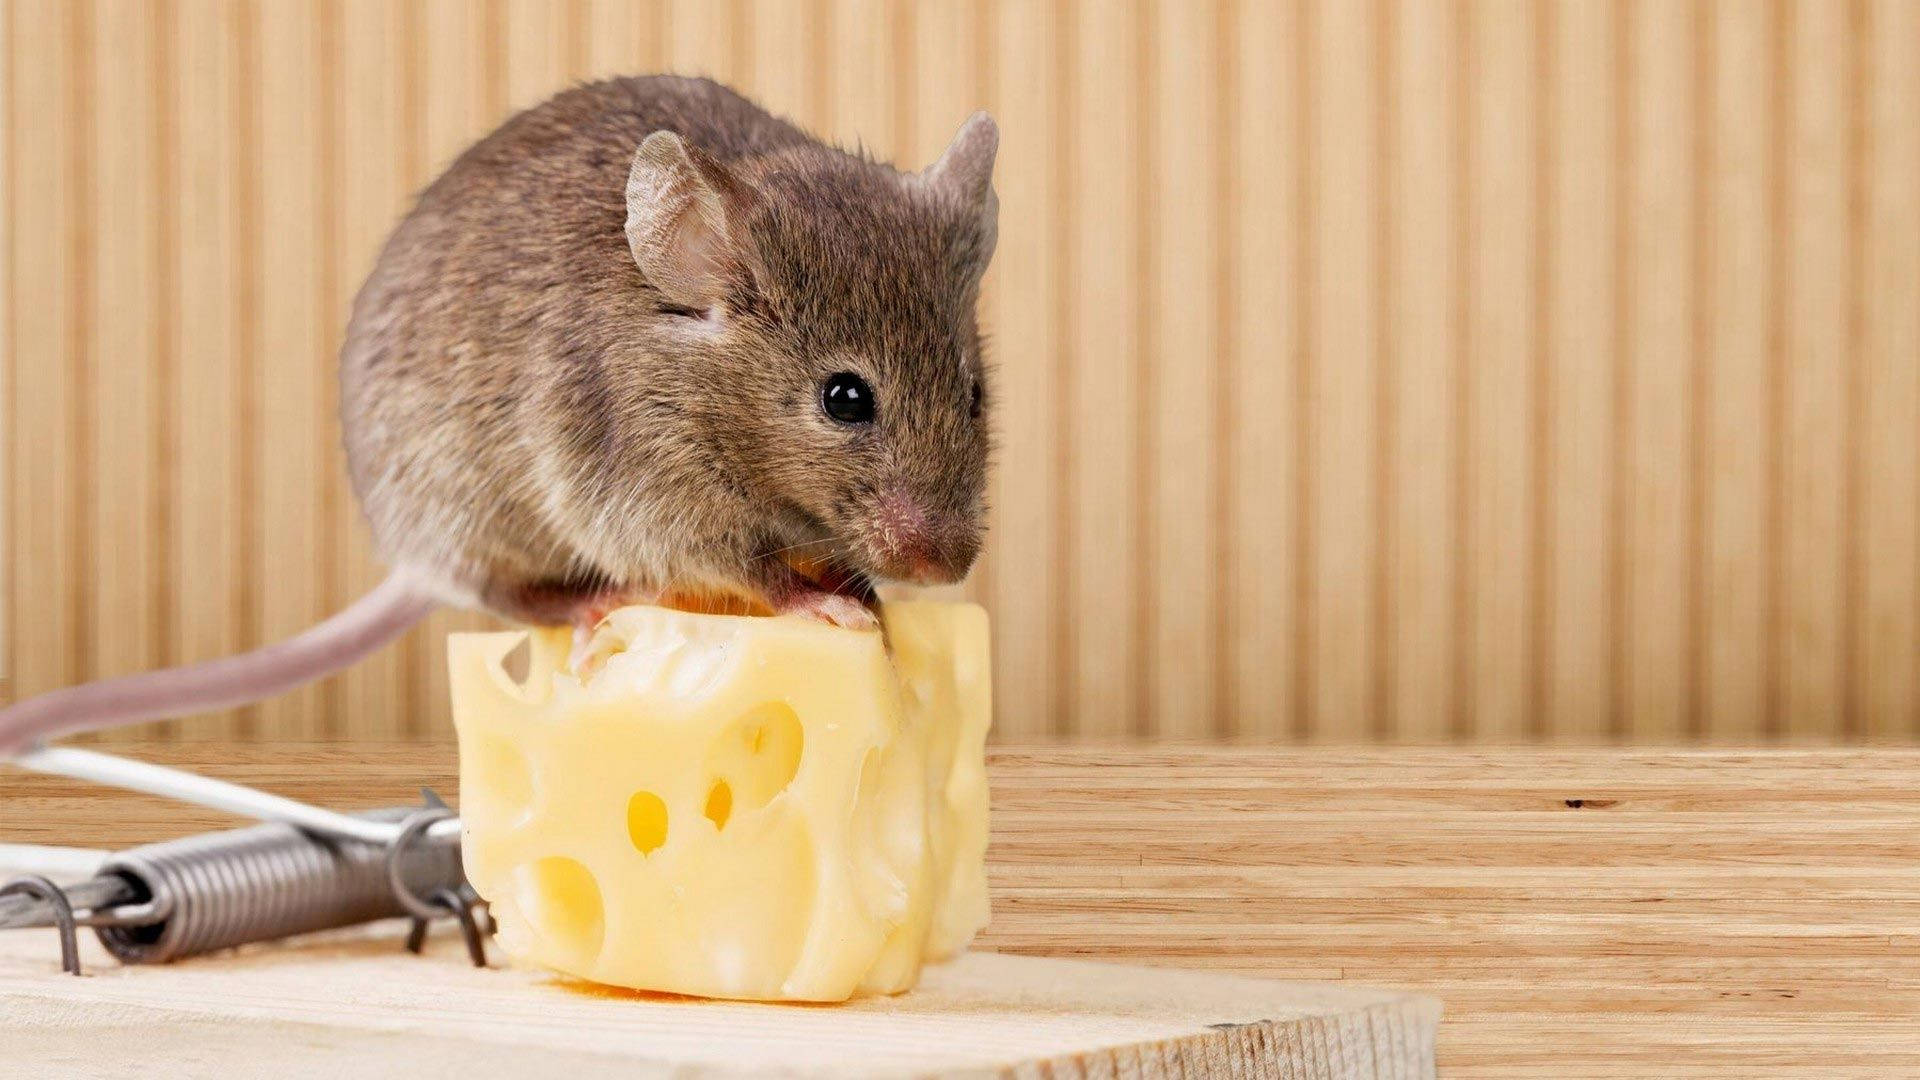 Baby Animal Mouse On Cheese Background